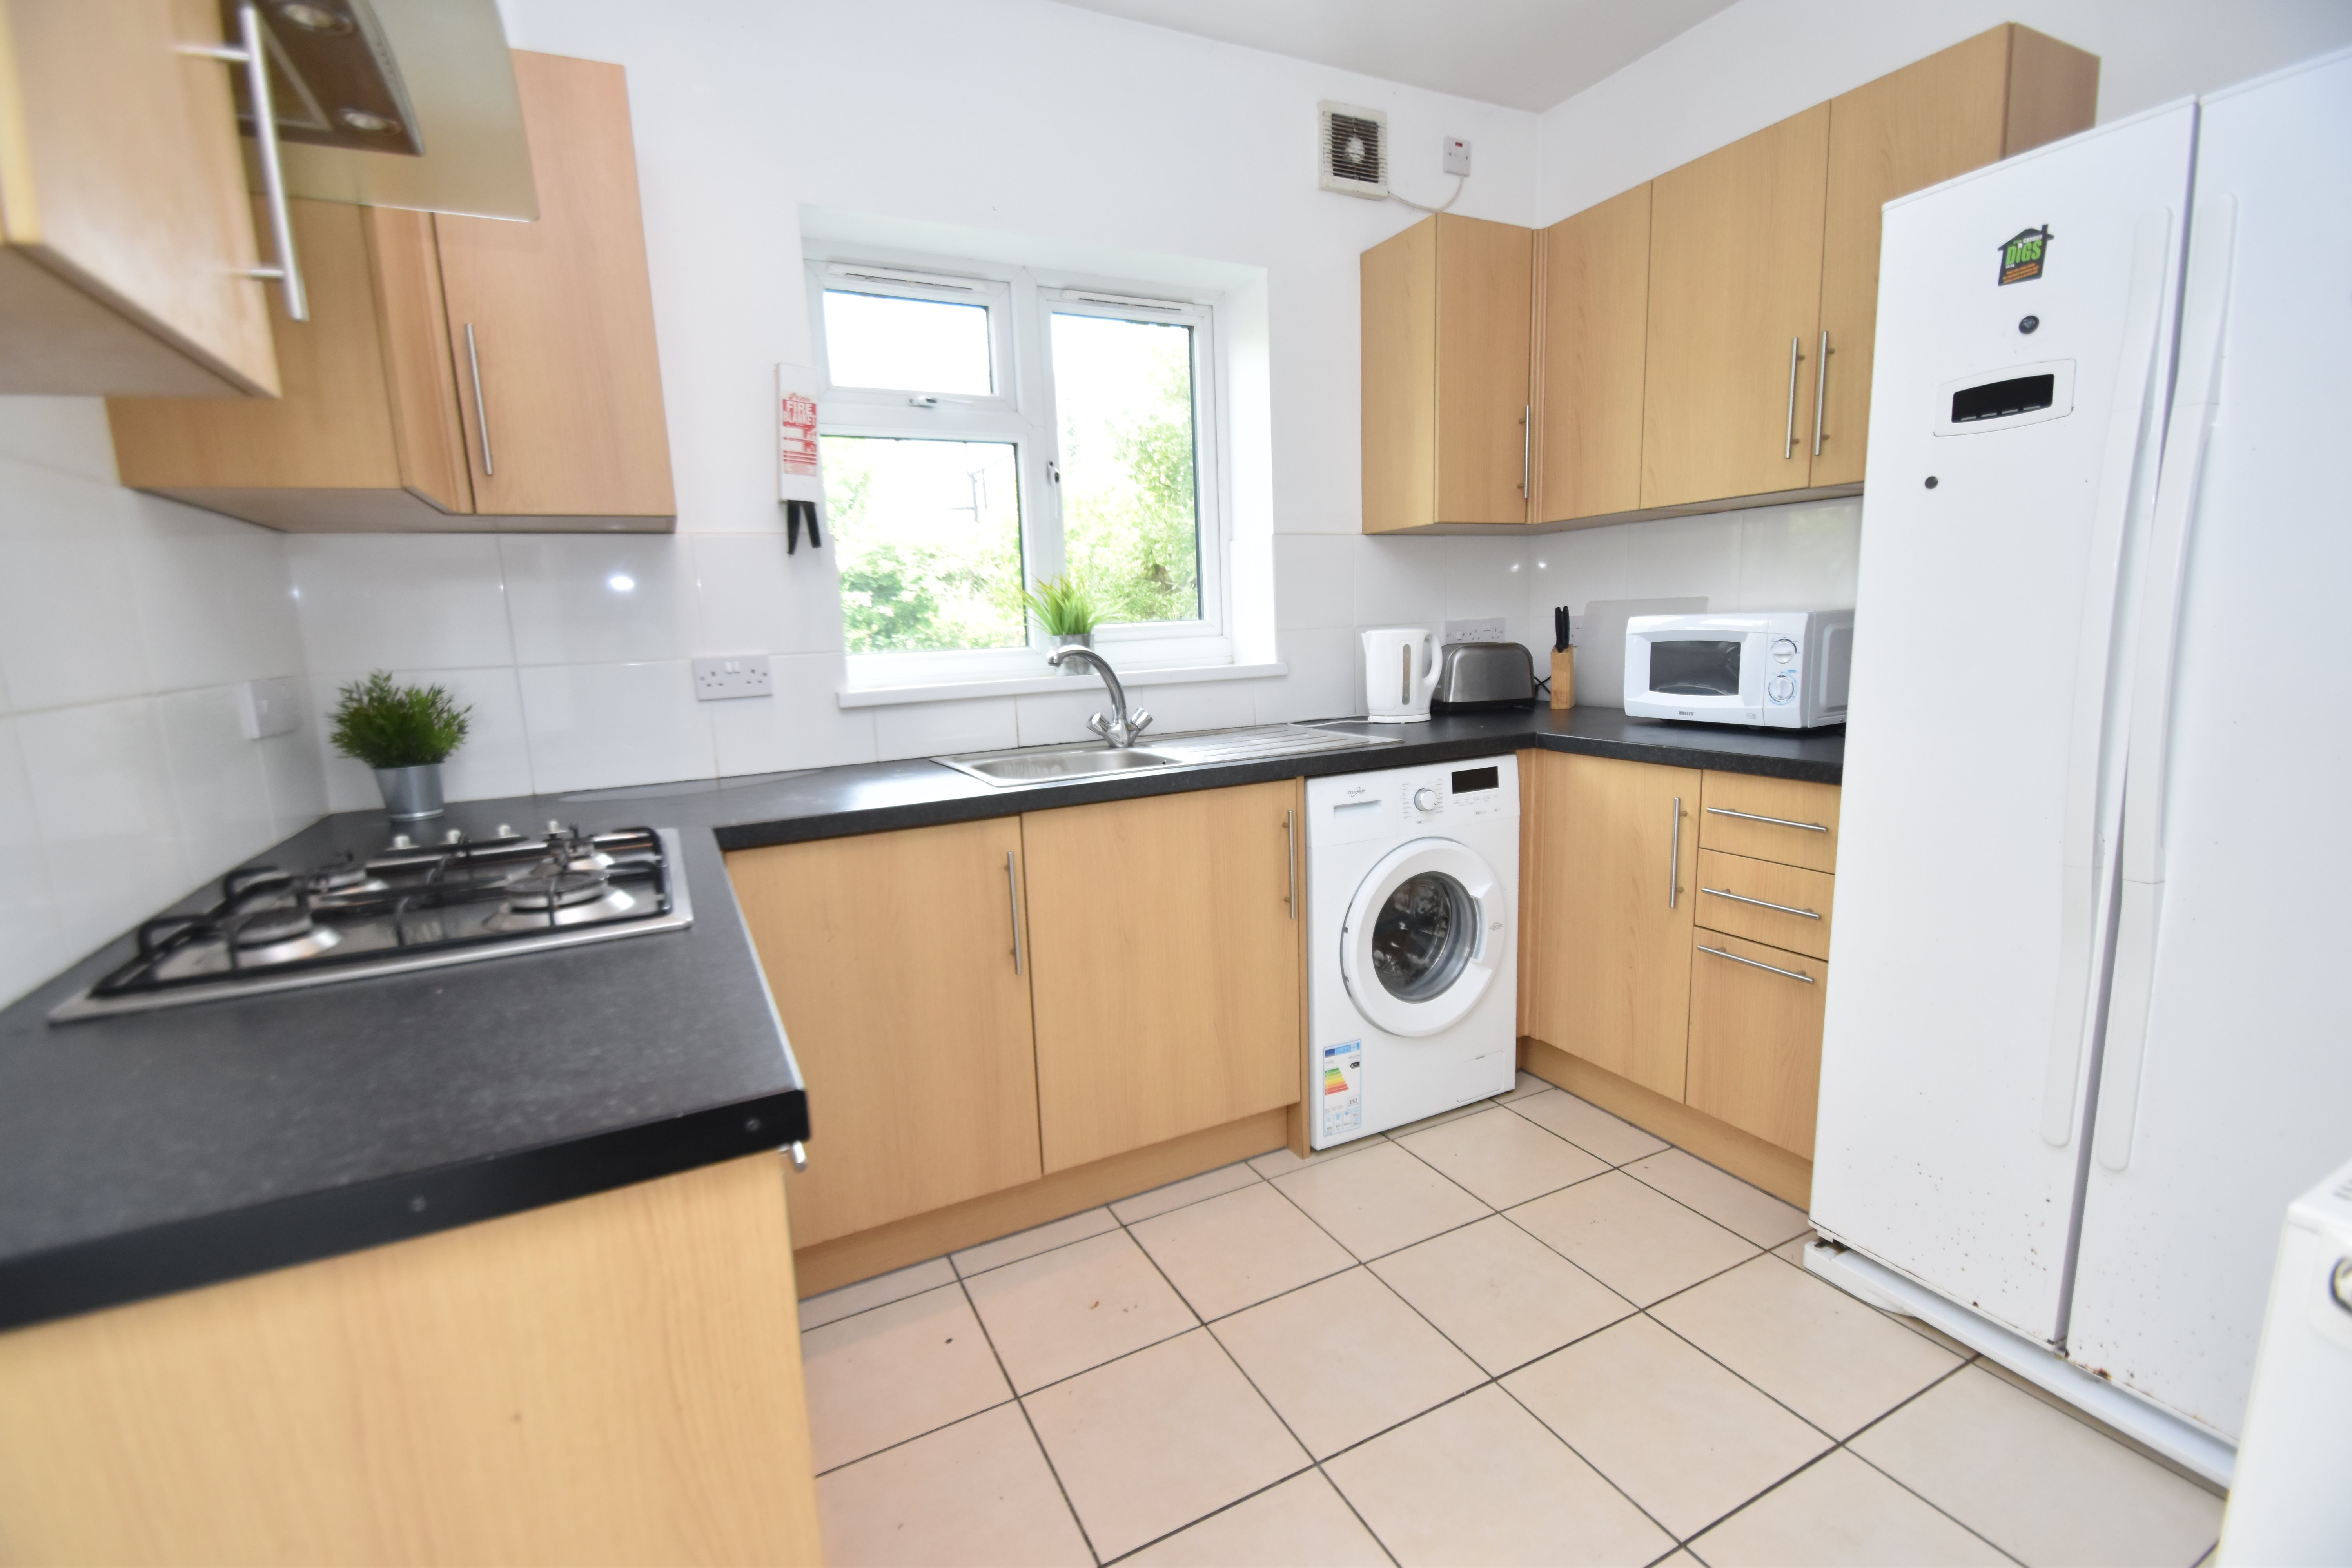 4 bed house to rent in Manor Street, Heath - Property Image 1